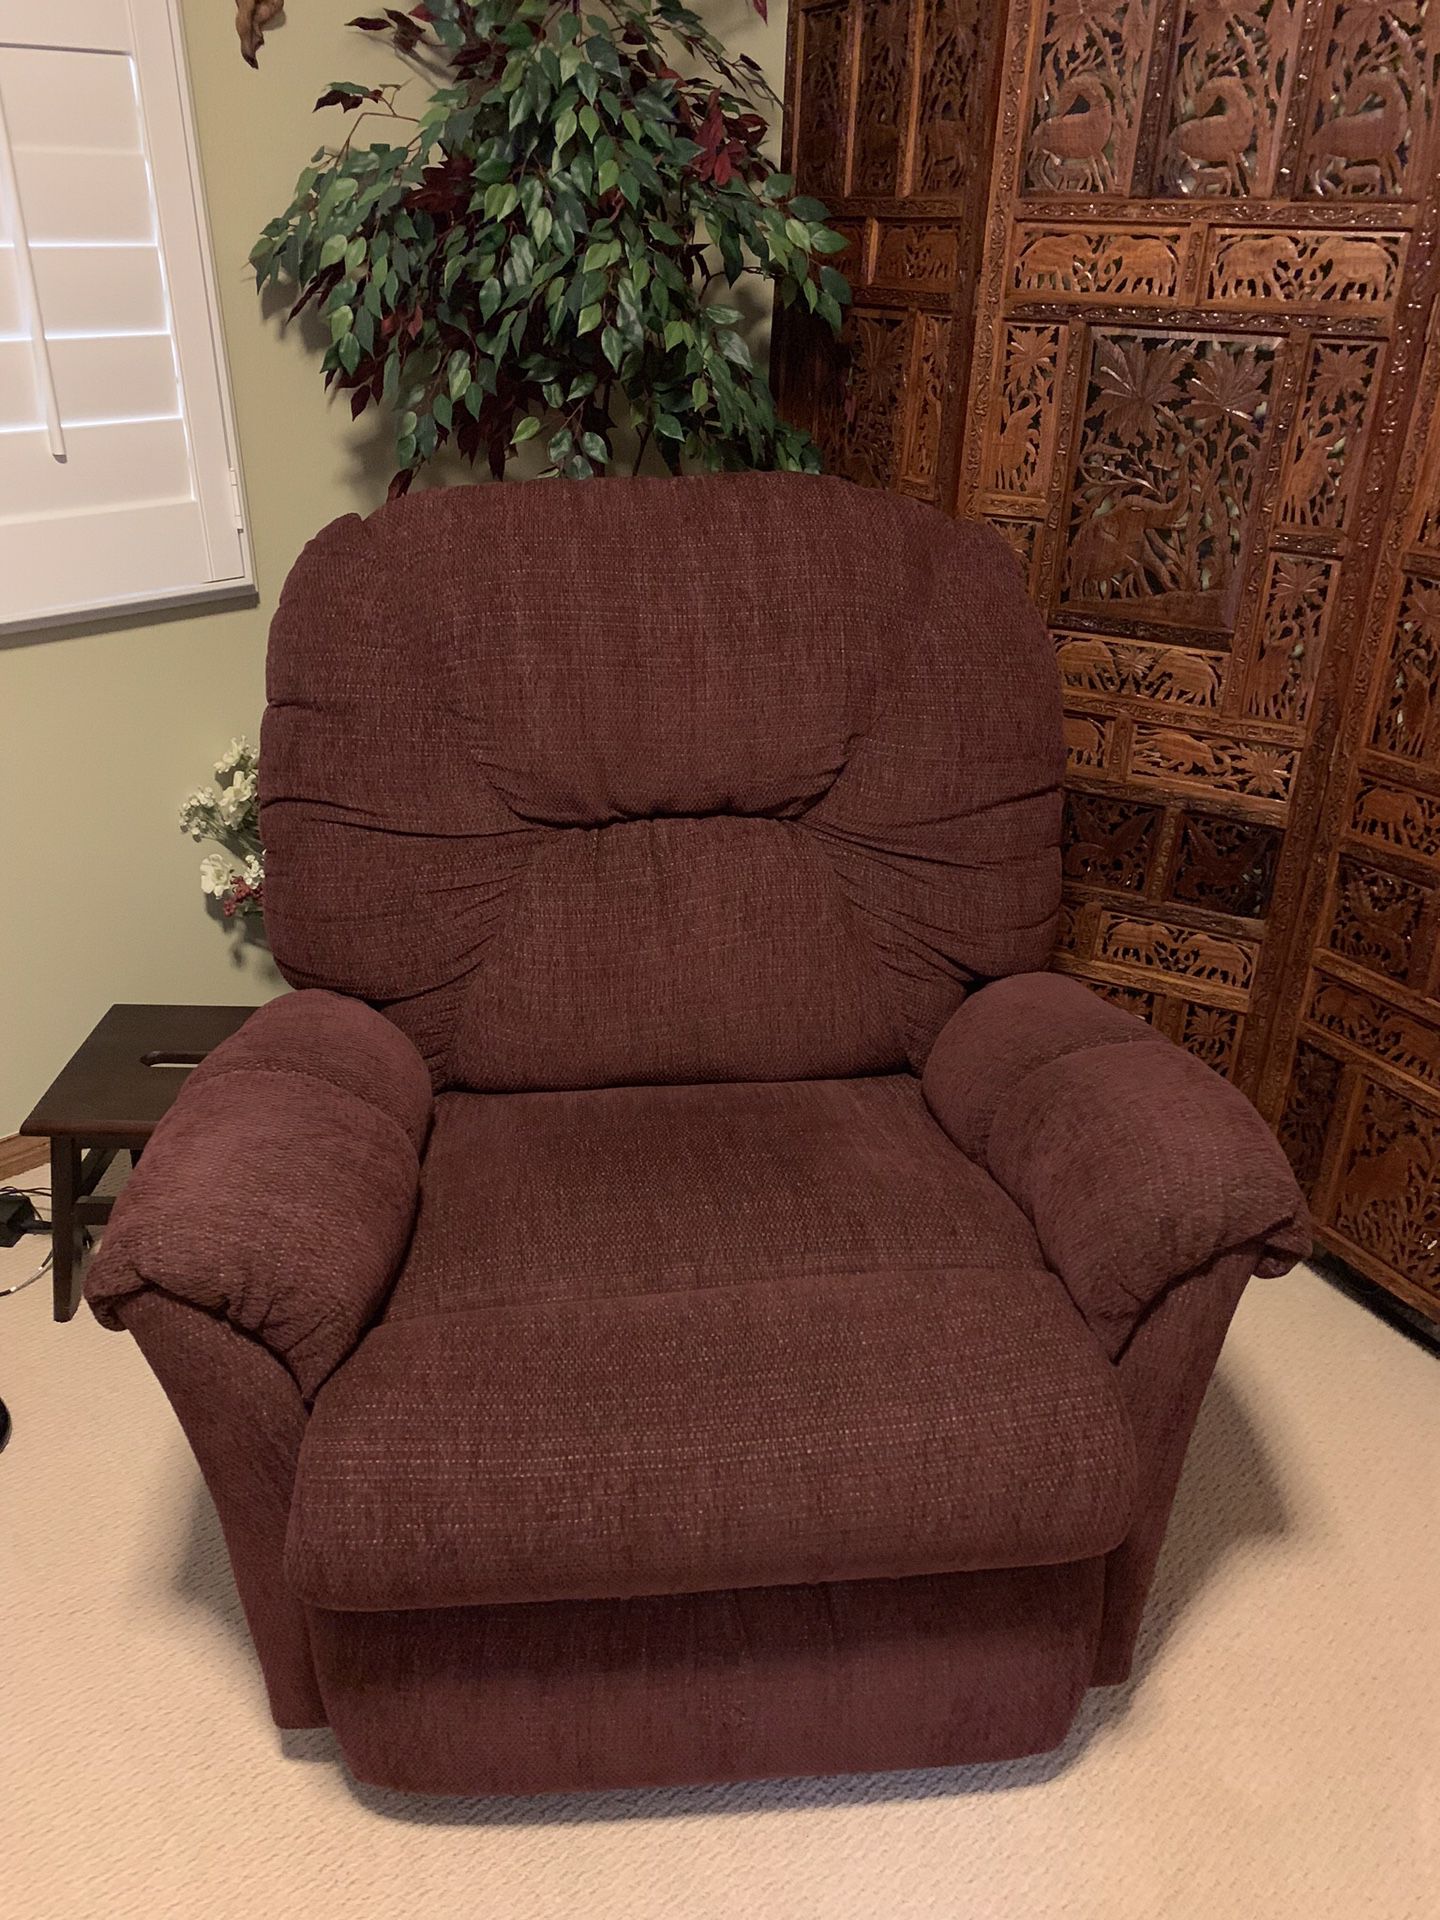 Rocker/Recliner-Reduced to sell